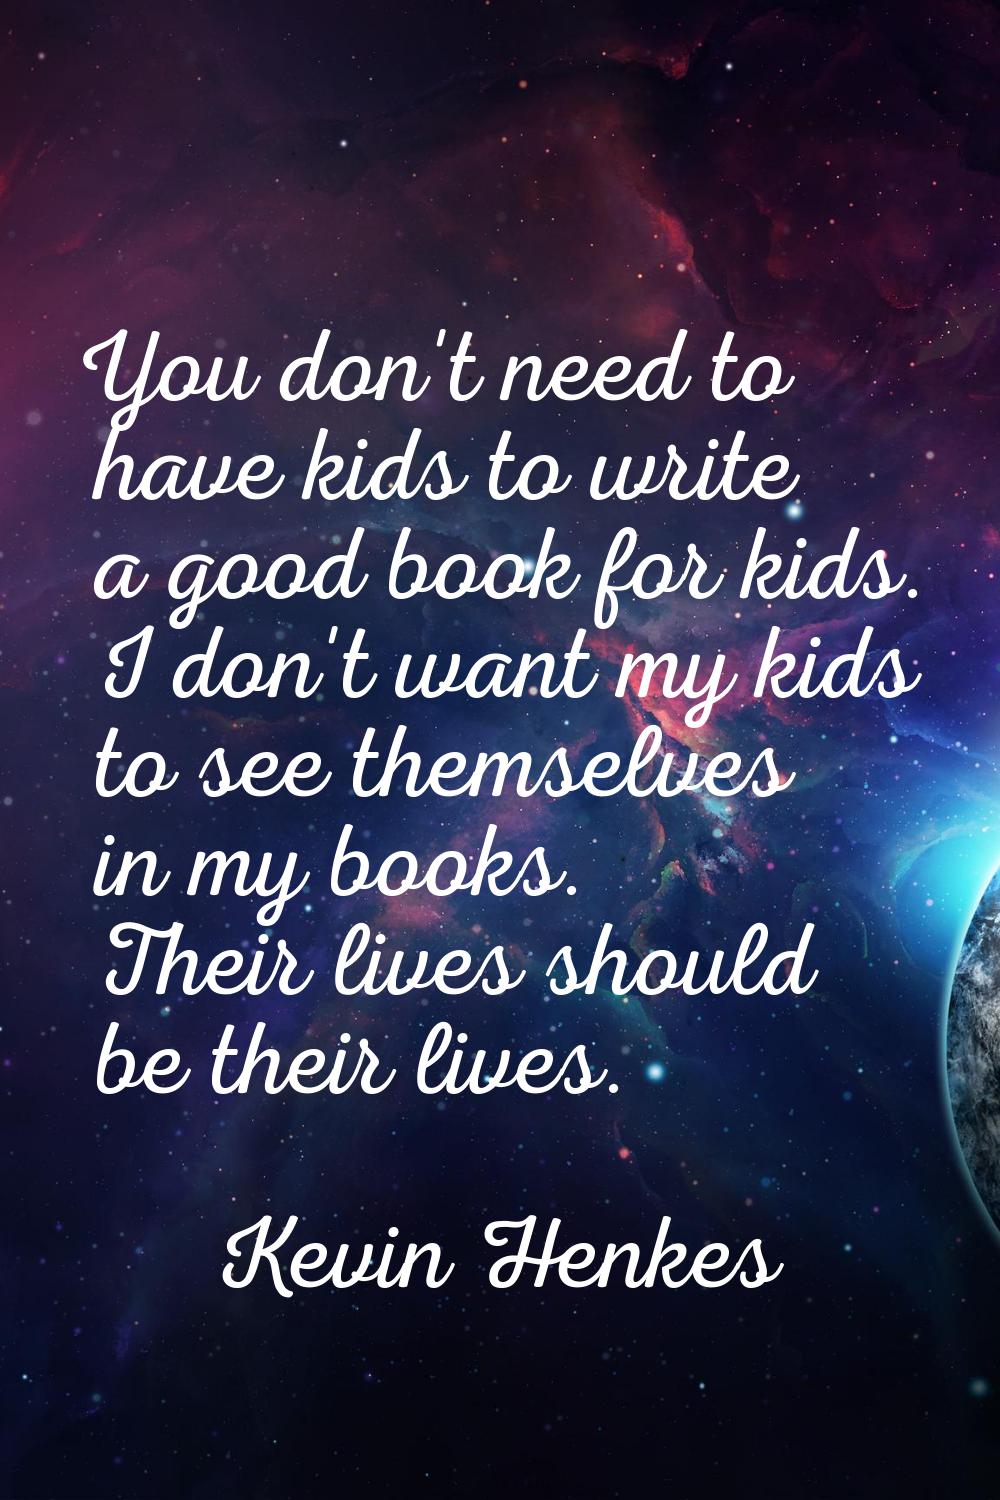 You don't need to have kids to write a good book for kids. I don't want my kids to see themselves i